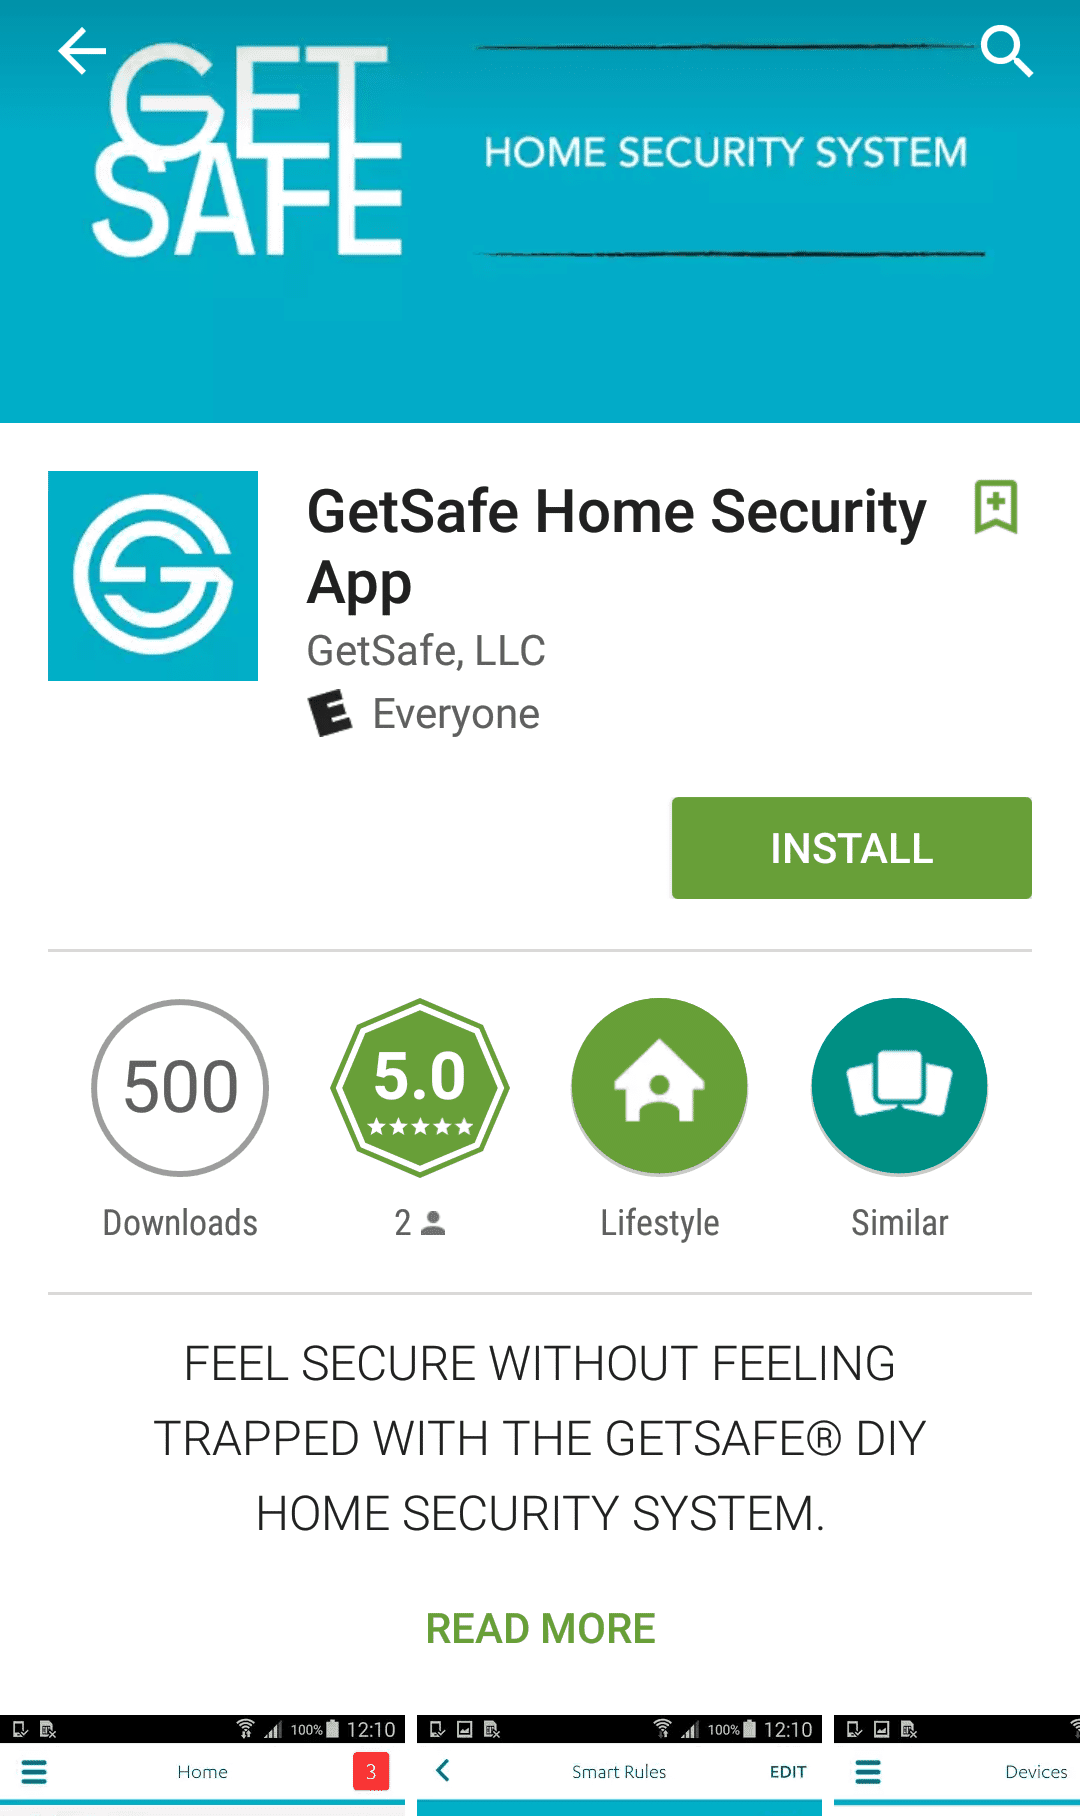 The GetSafe app is available for both Android and iOS.